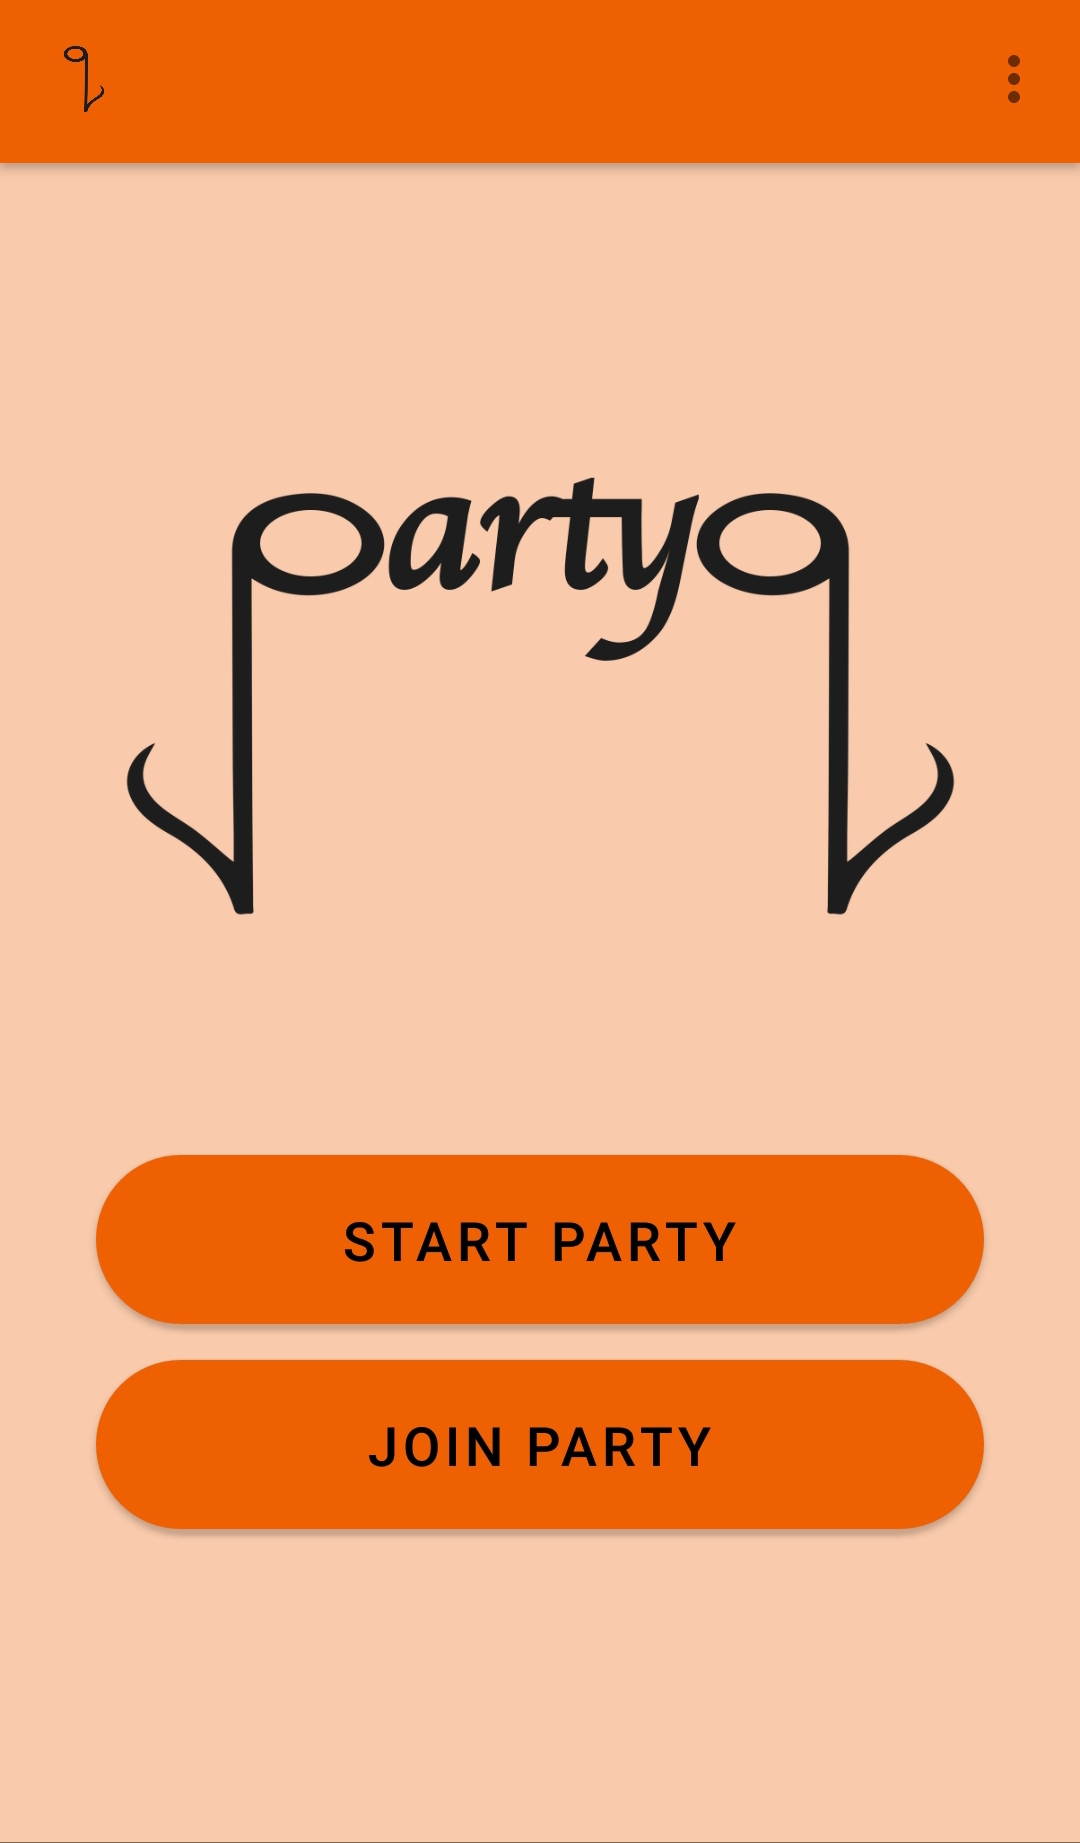 partyq home screen